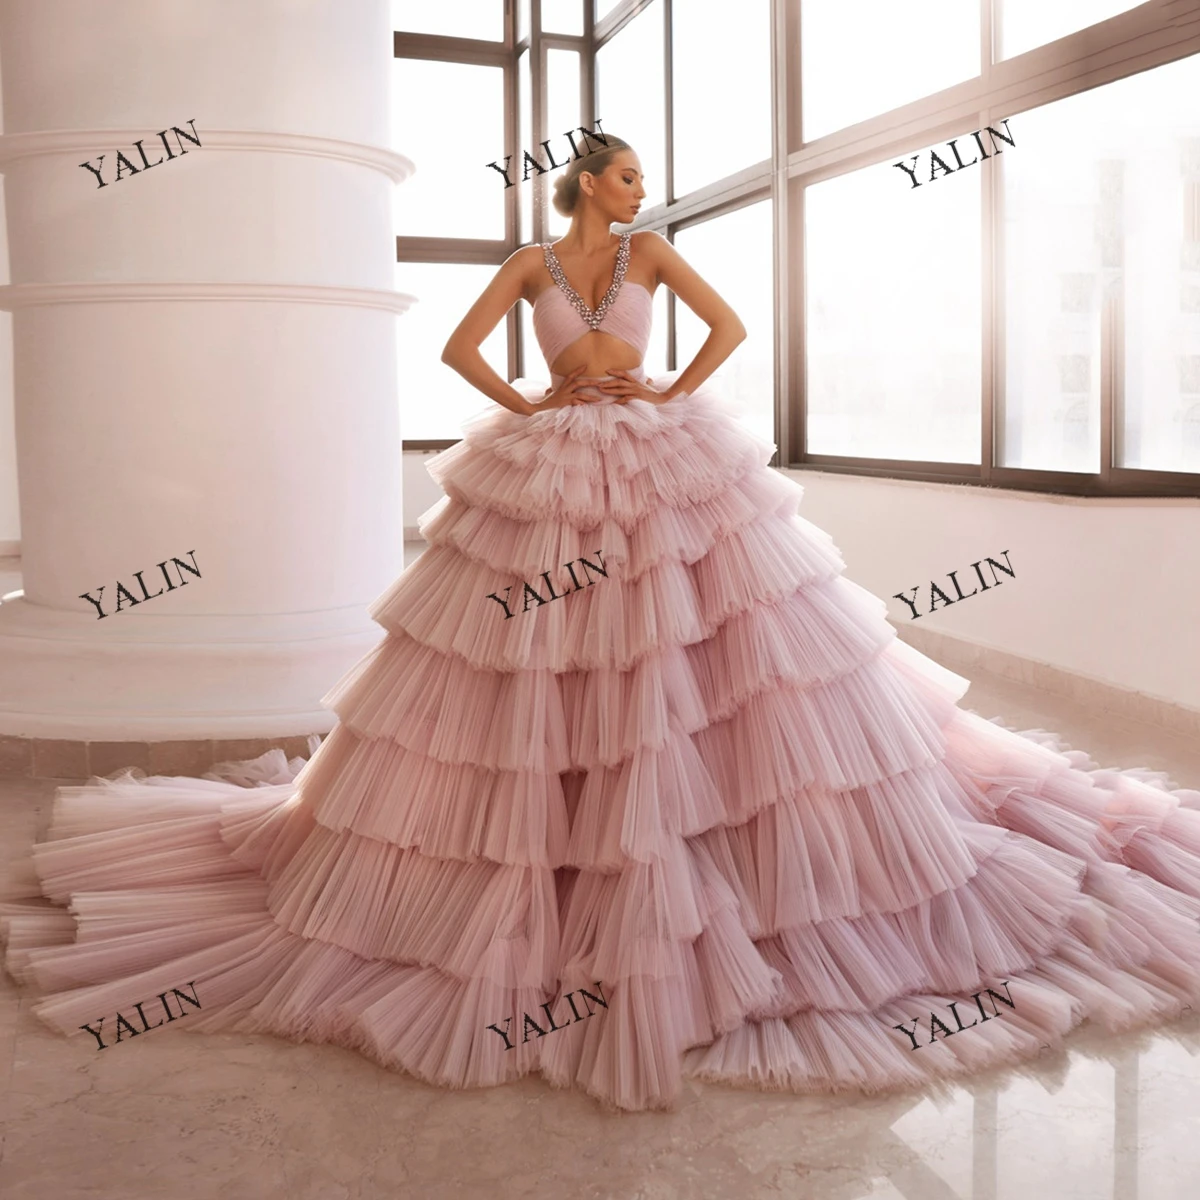 

YALIN Dusty Pink Tulle Tiered Celebrity Dresses Luxury V-Neck Crystals Birthday Party Dress Brush Train Sexy Evening Ball Gowns